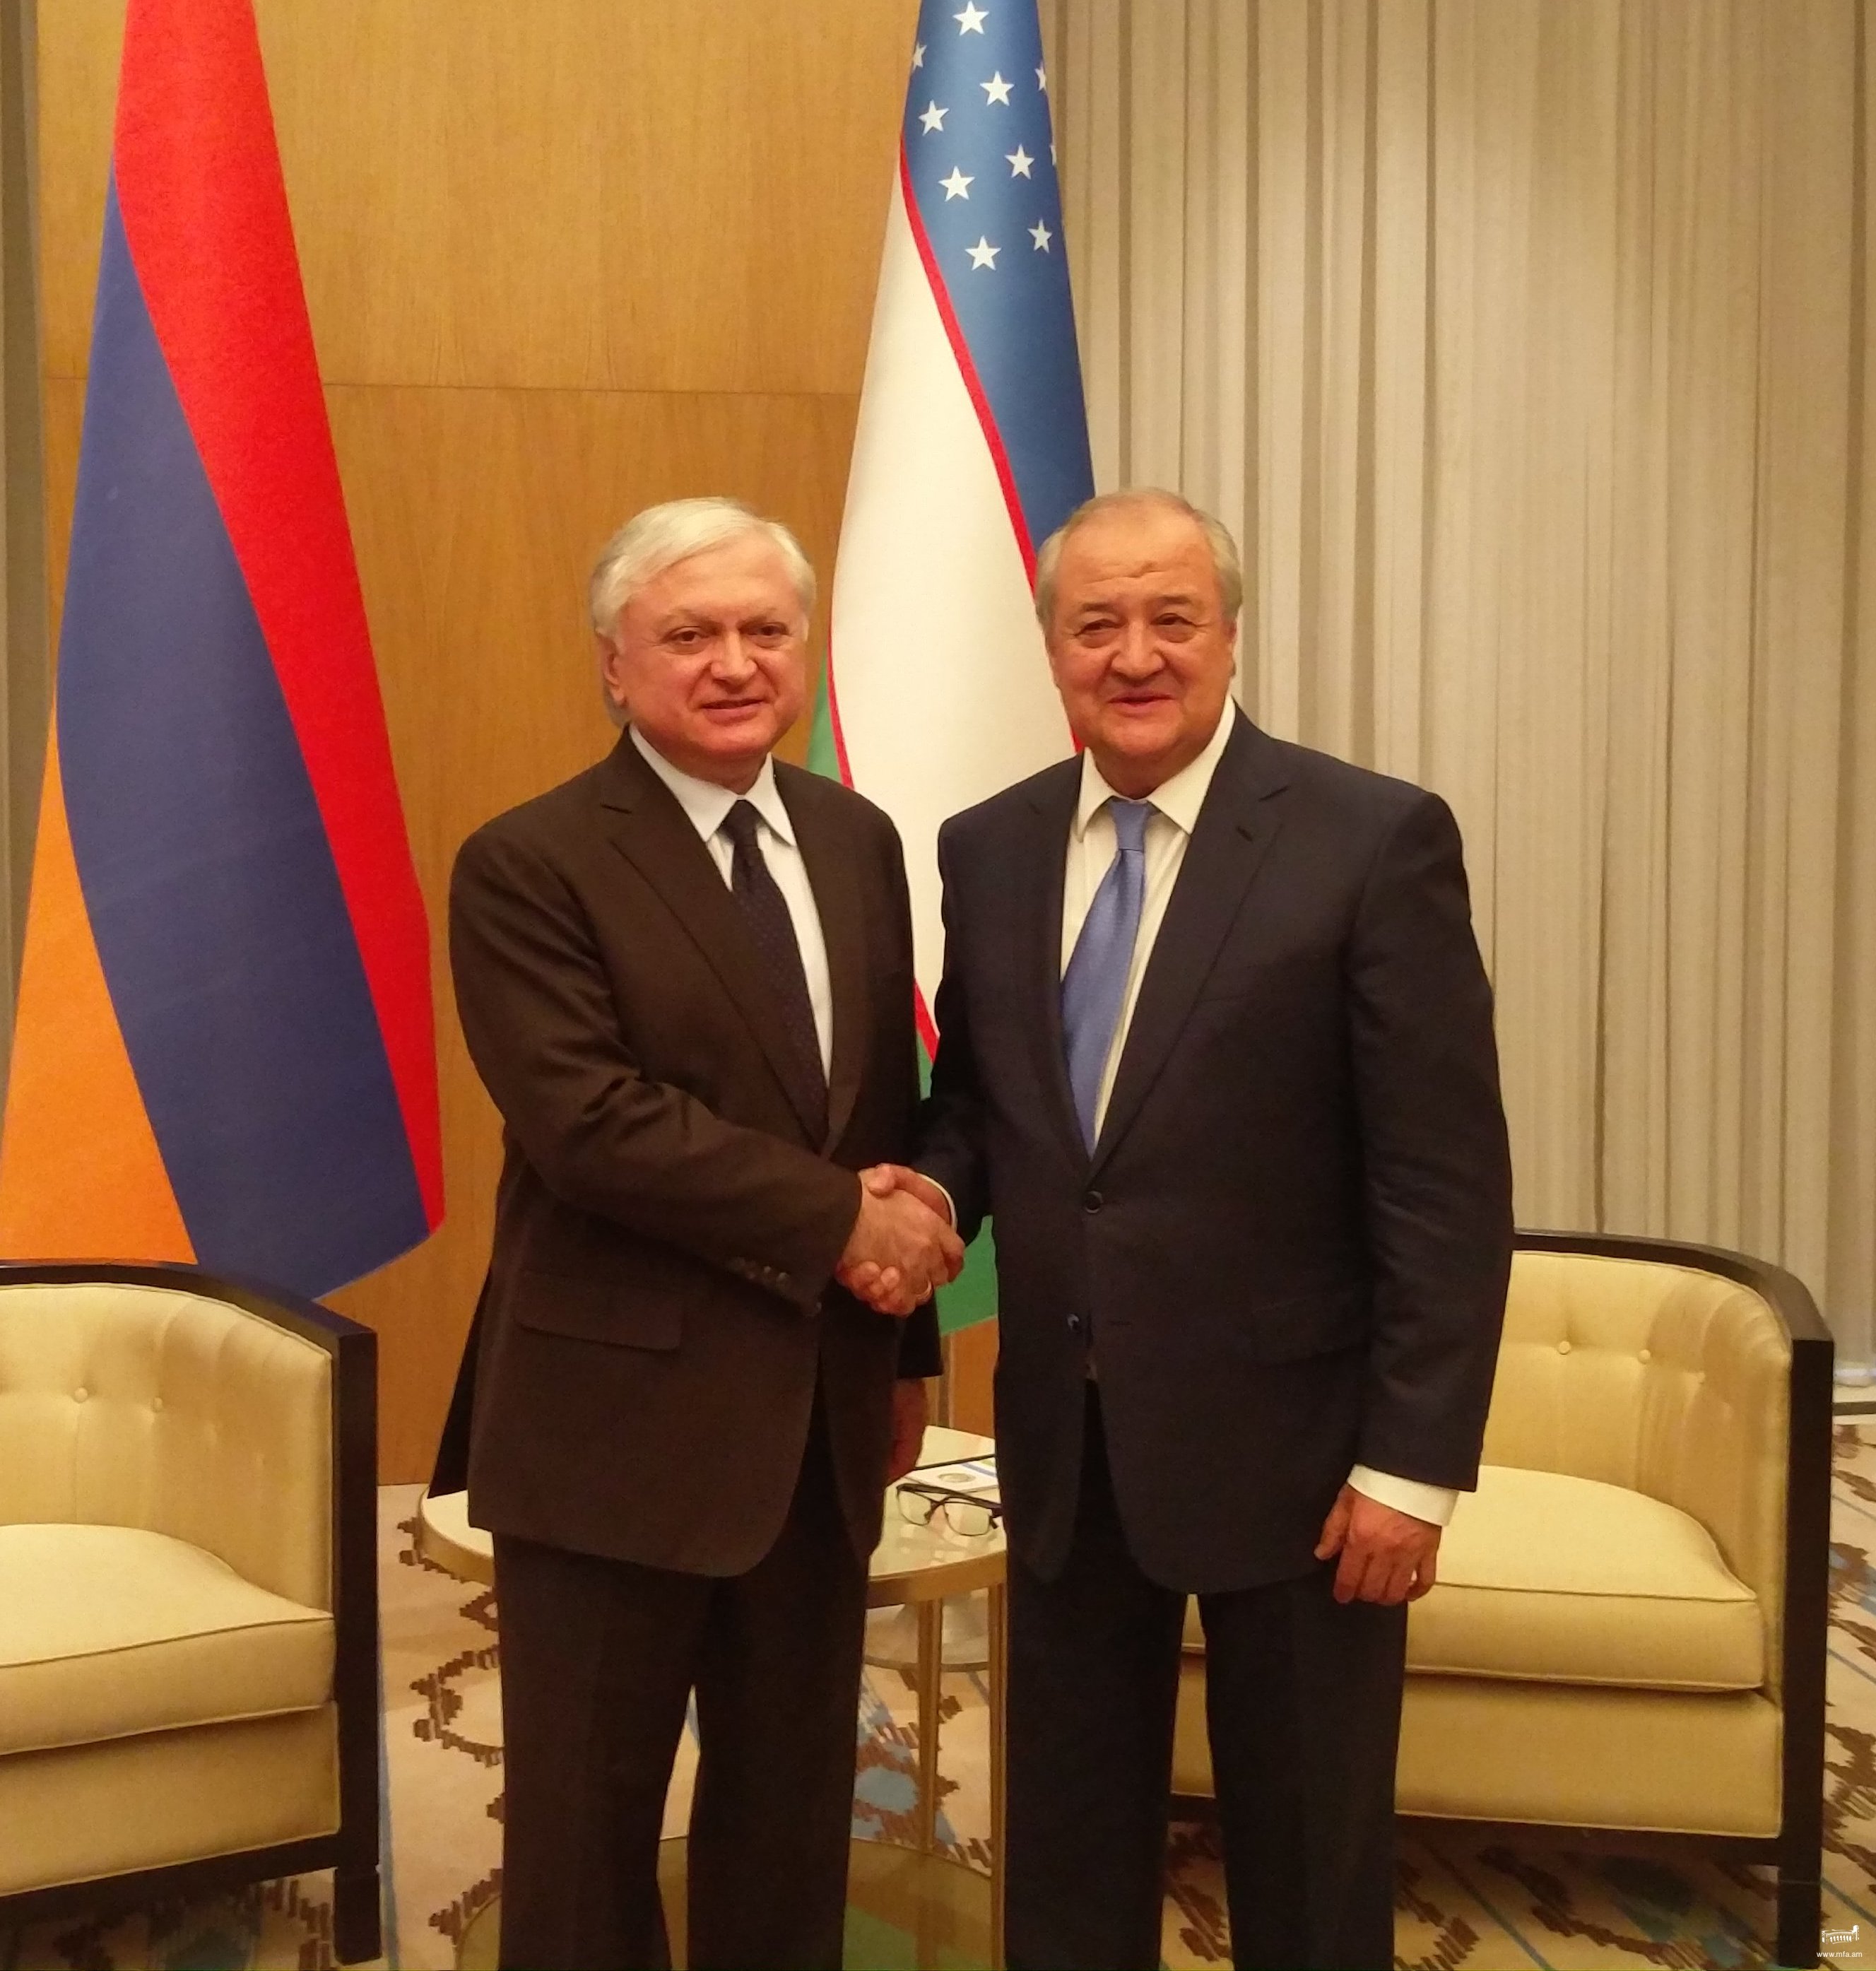 Meeting of Foreign Ministers of Armenia and Uzbekistan